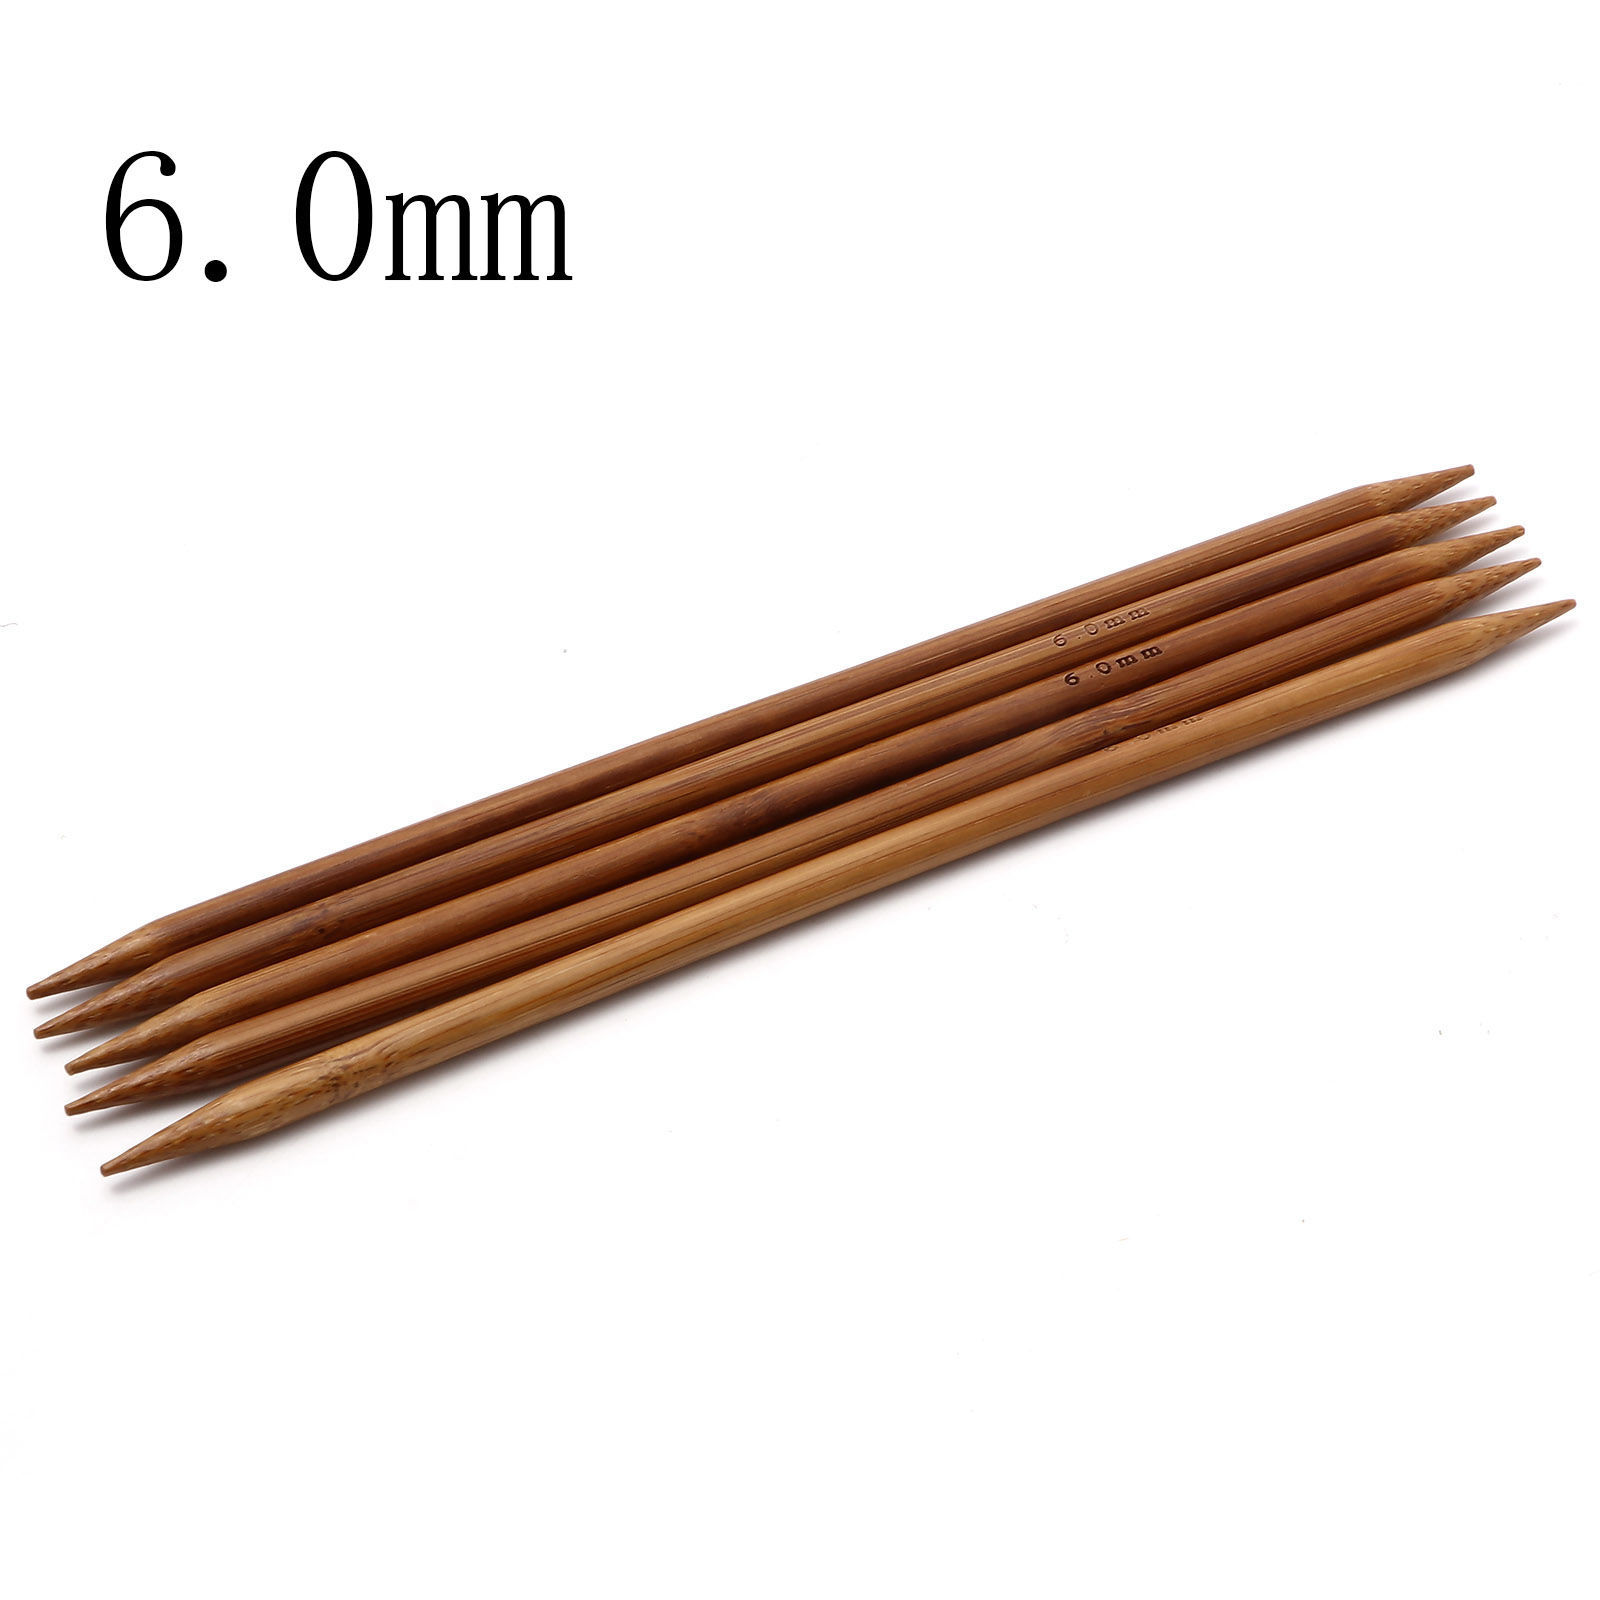 Picture of (US10 6.0mm) Bamboo Double Pointed Knitting Needles Brown 20cm(7 7/8") long, 5 PCs